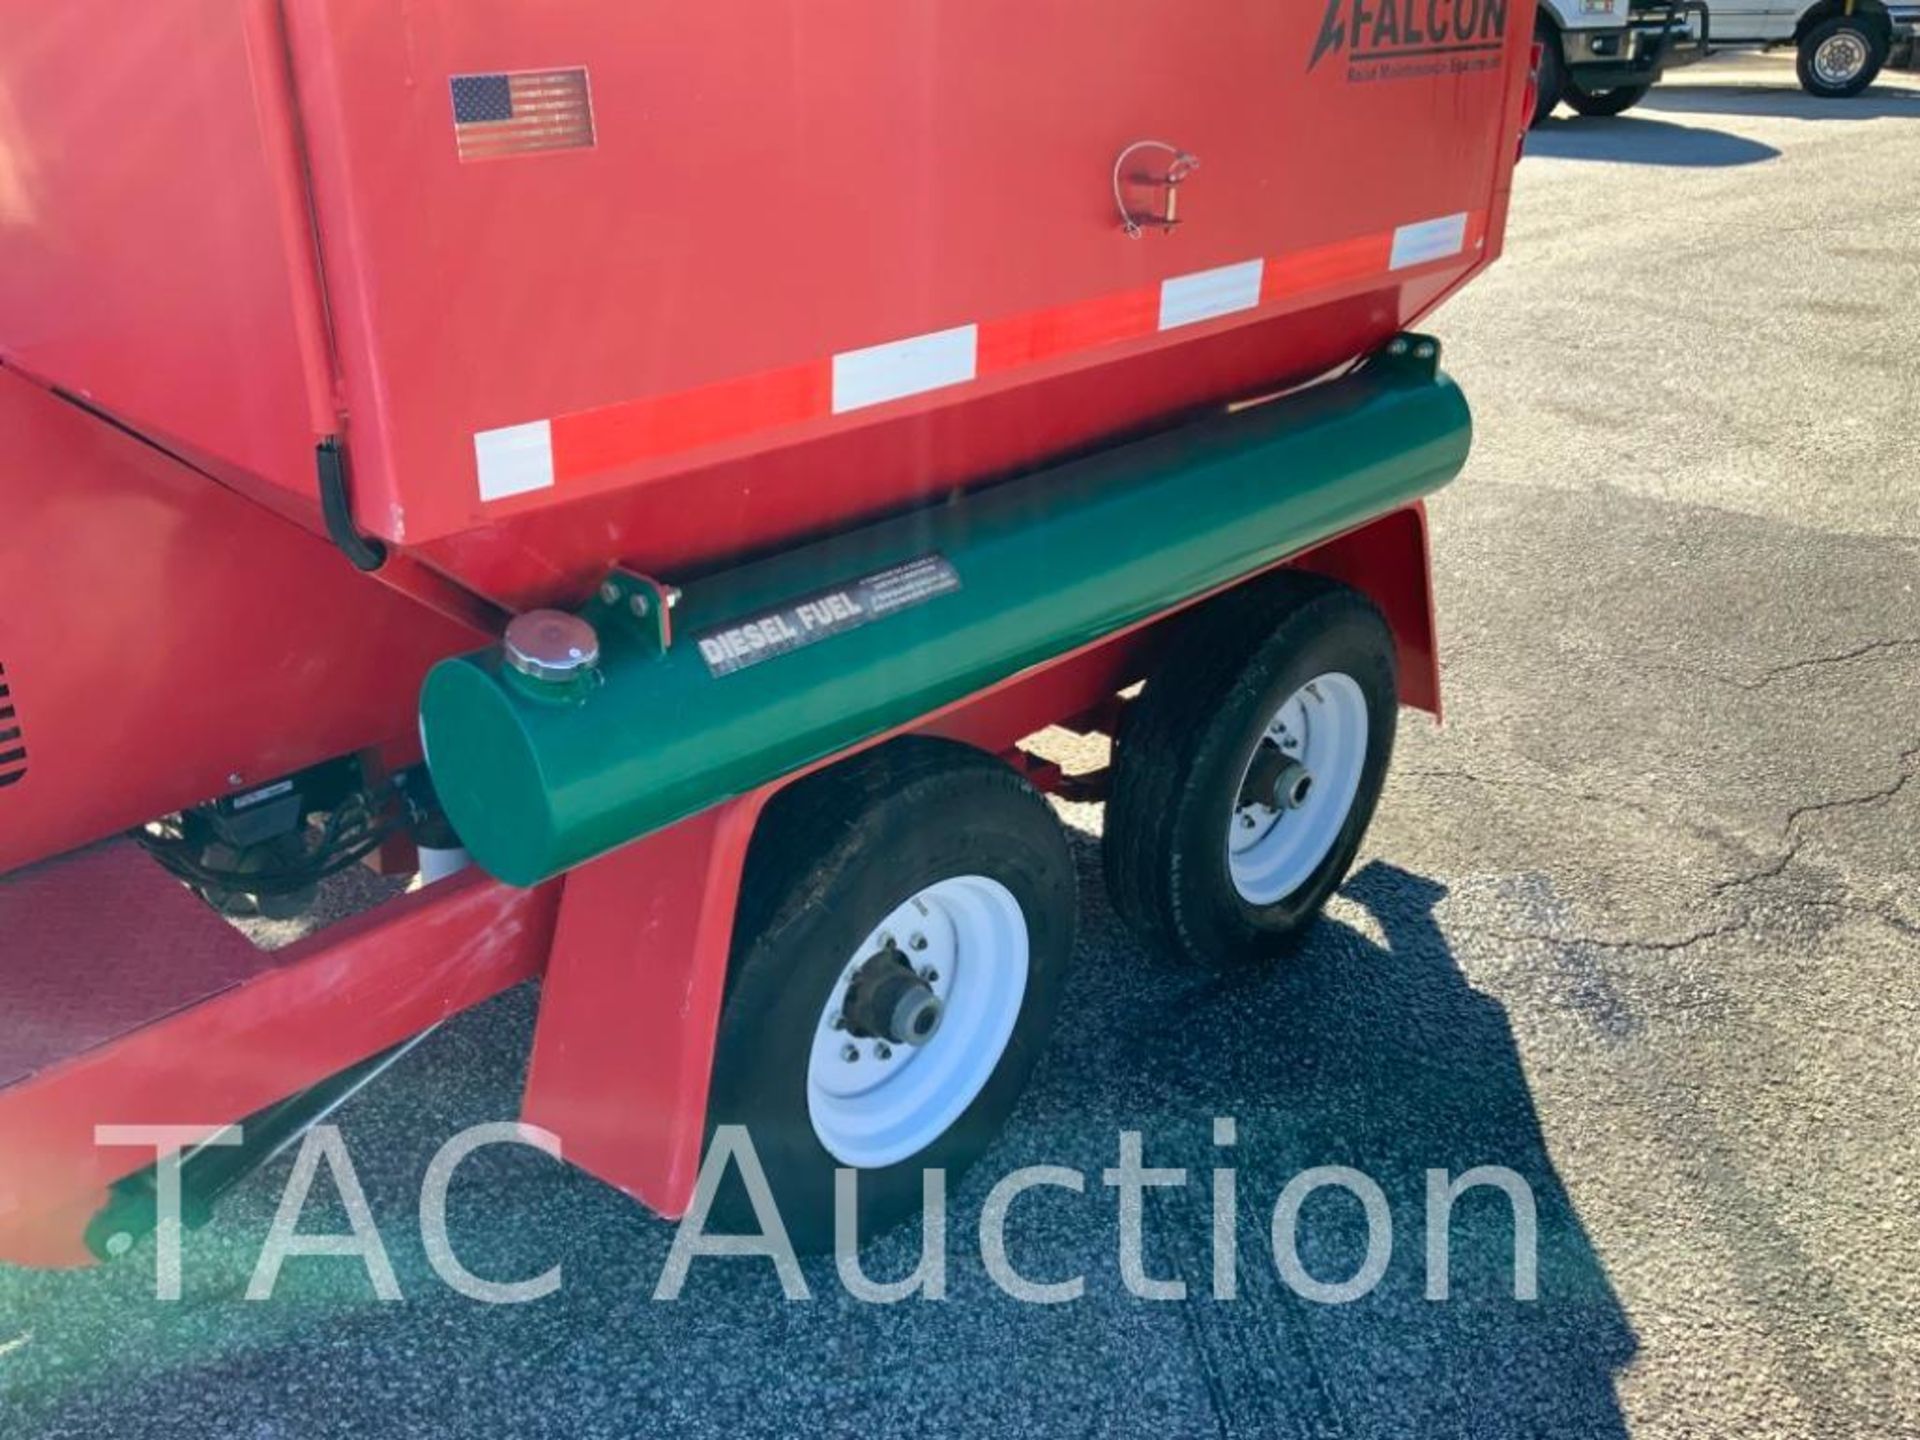 2010 4 Ton Falcon Towable Asphalt Recycler and Hot Box Trailer - Image 23 of 29